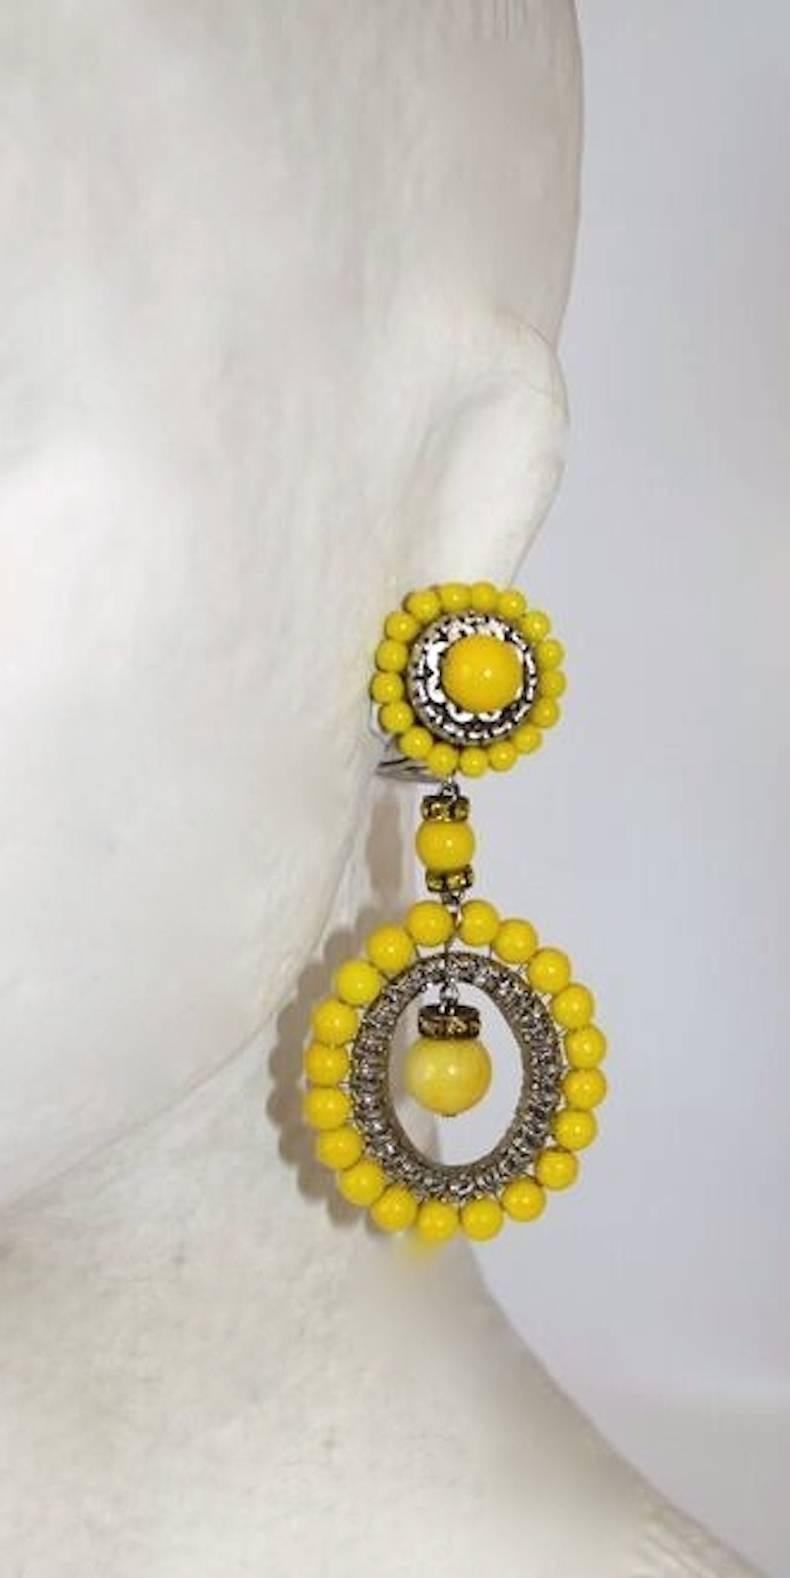 Yellow glass bead earrings with silver detailing from Francoise Montague. 

3